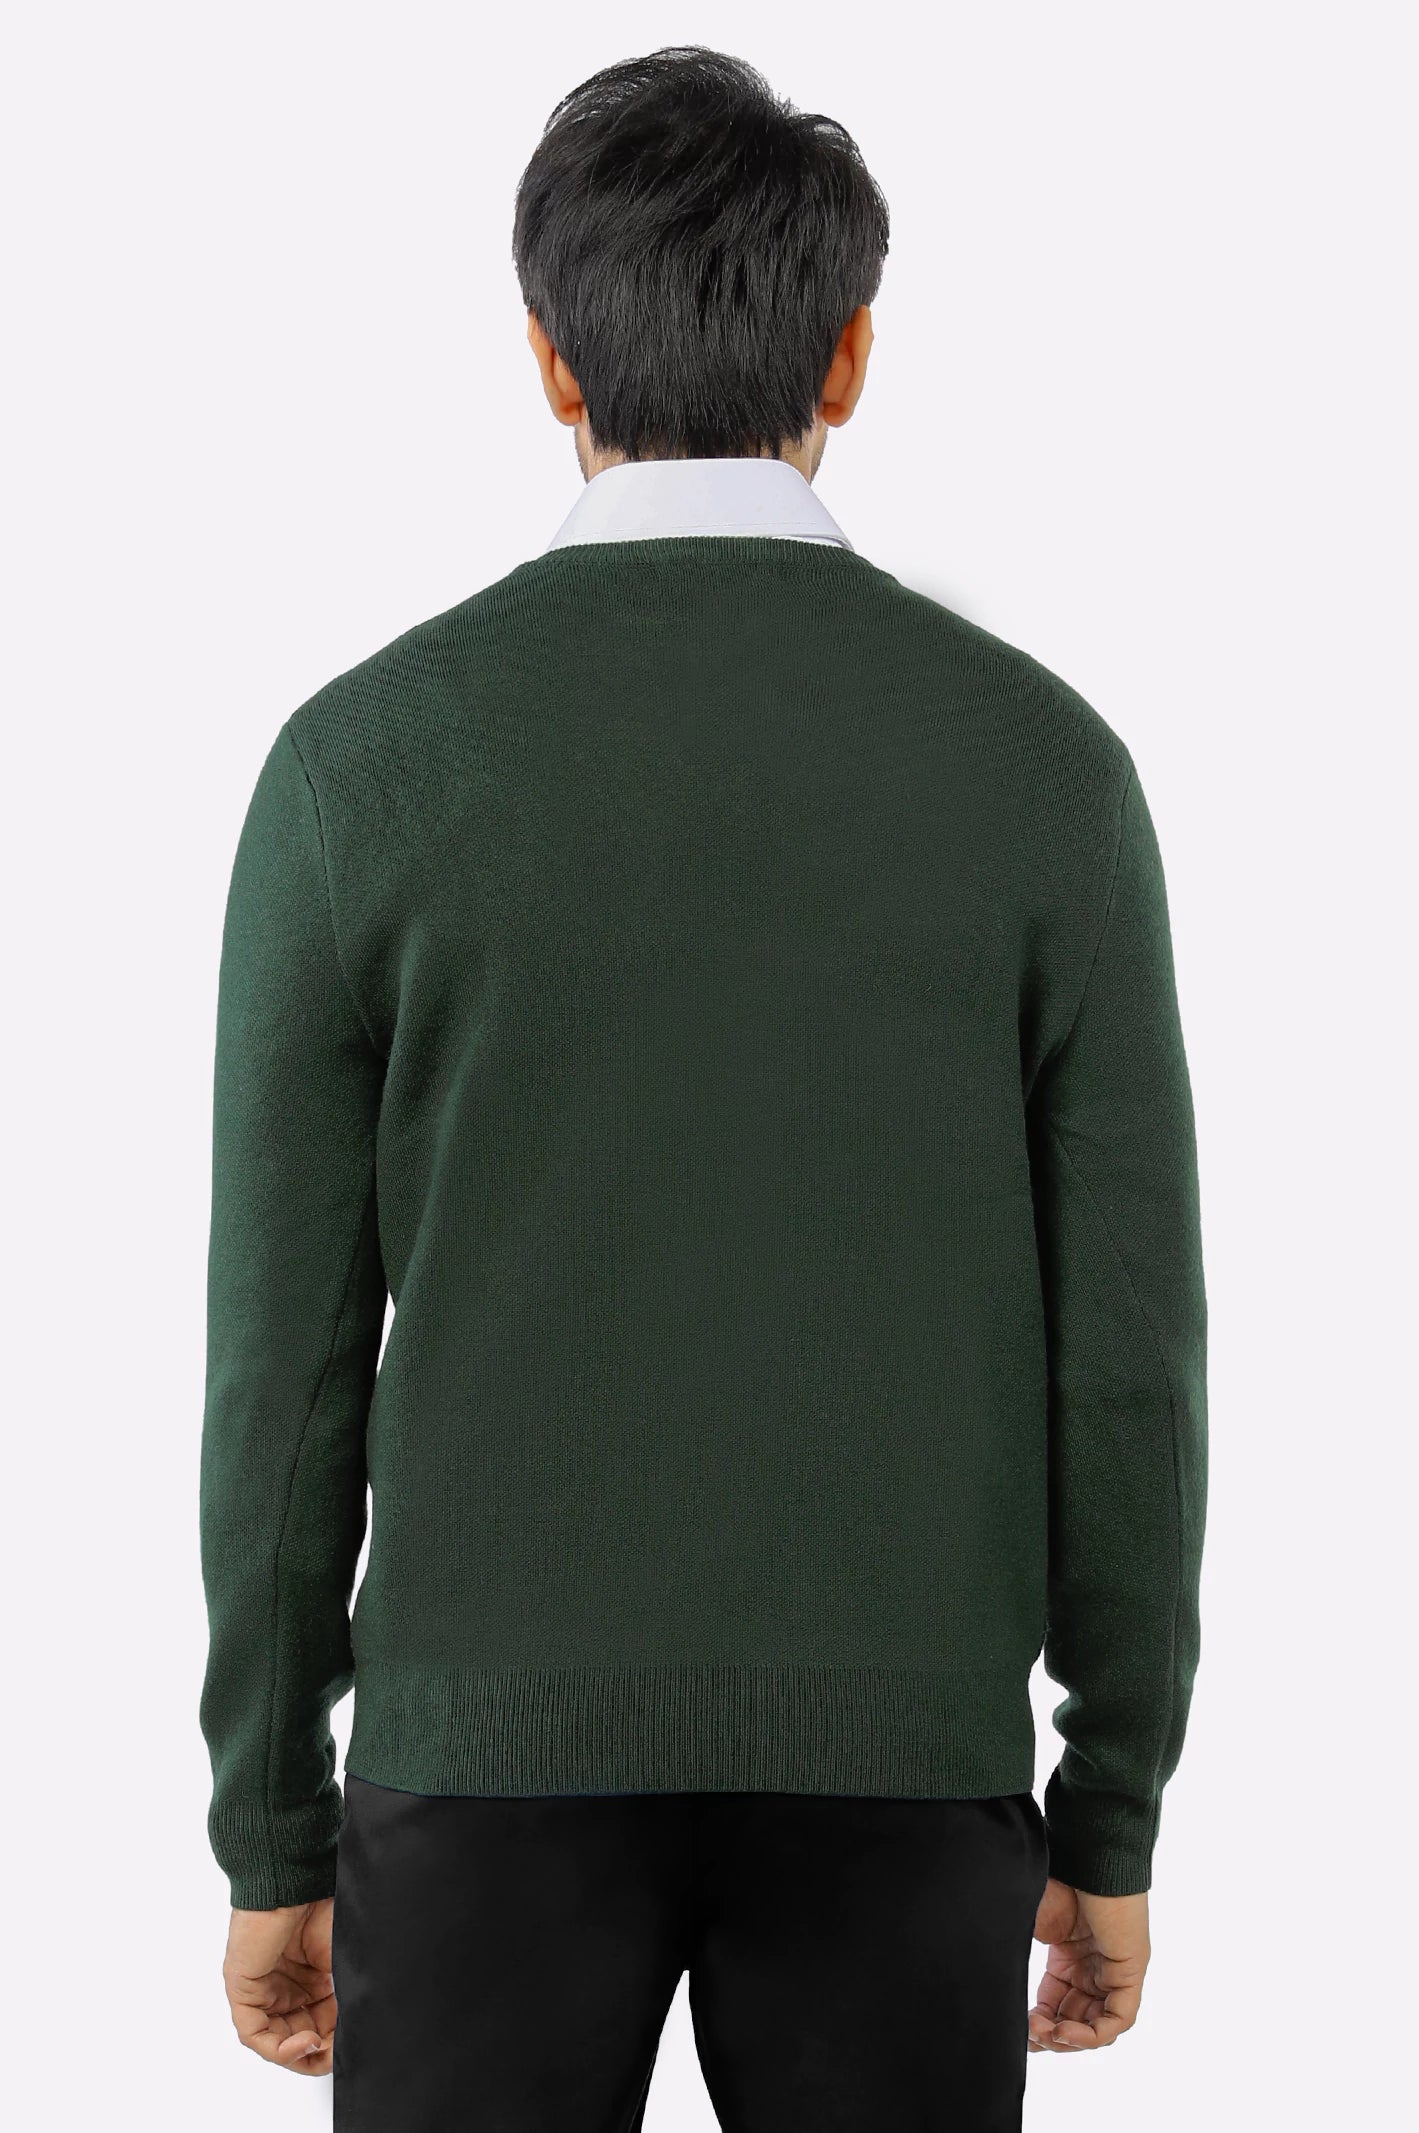 Green V-Neck Gents Sweater From Diners